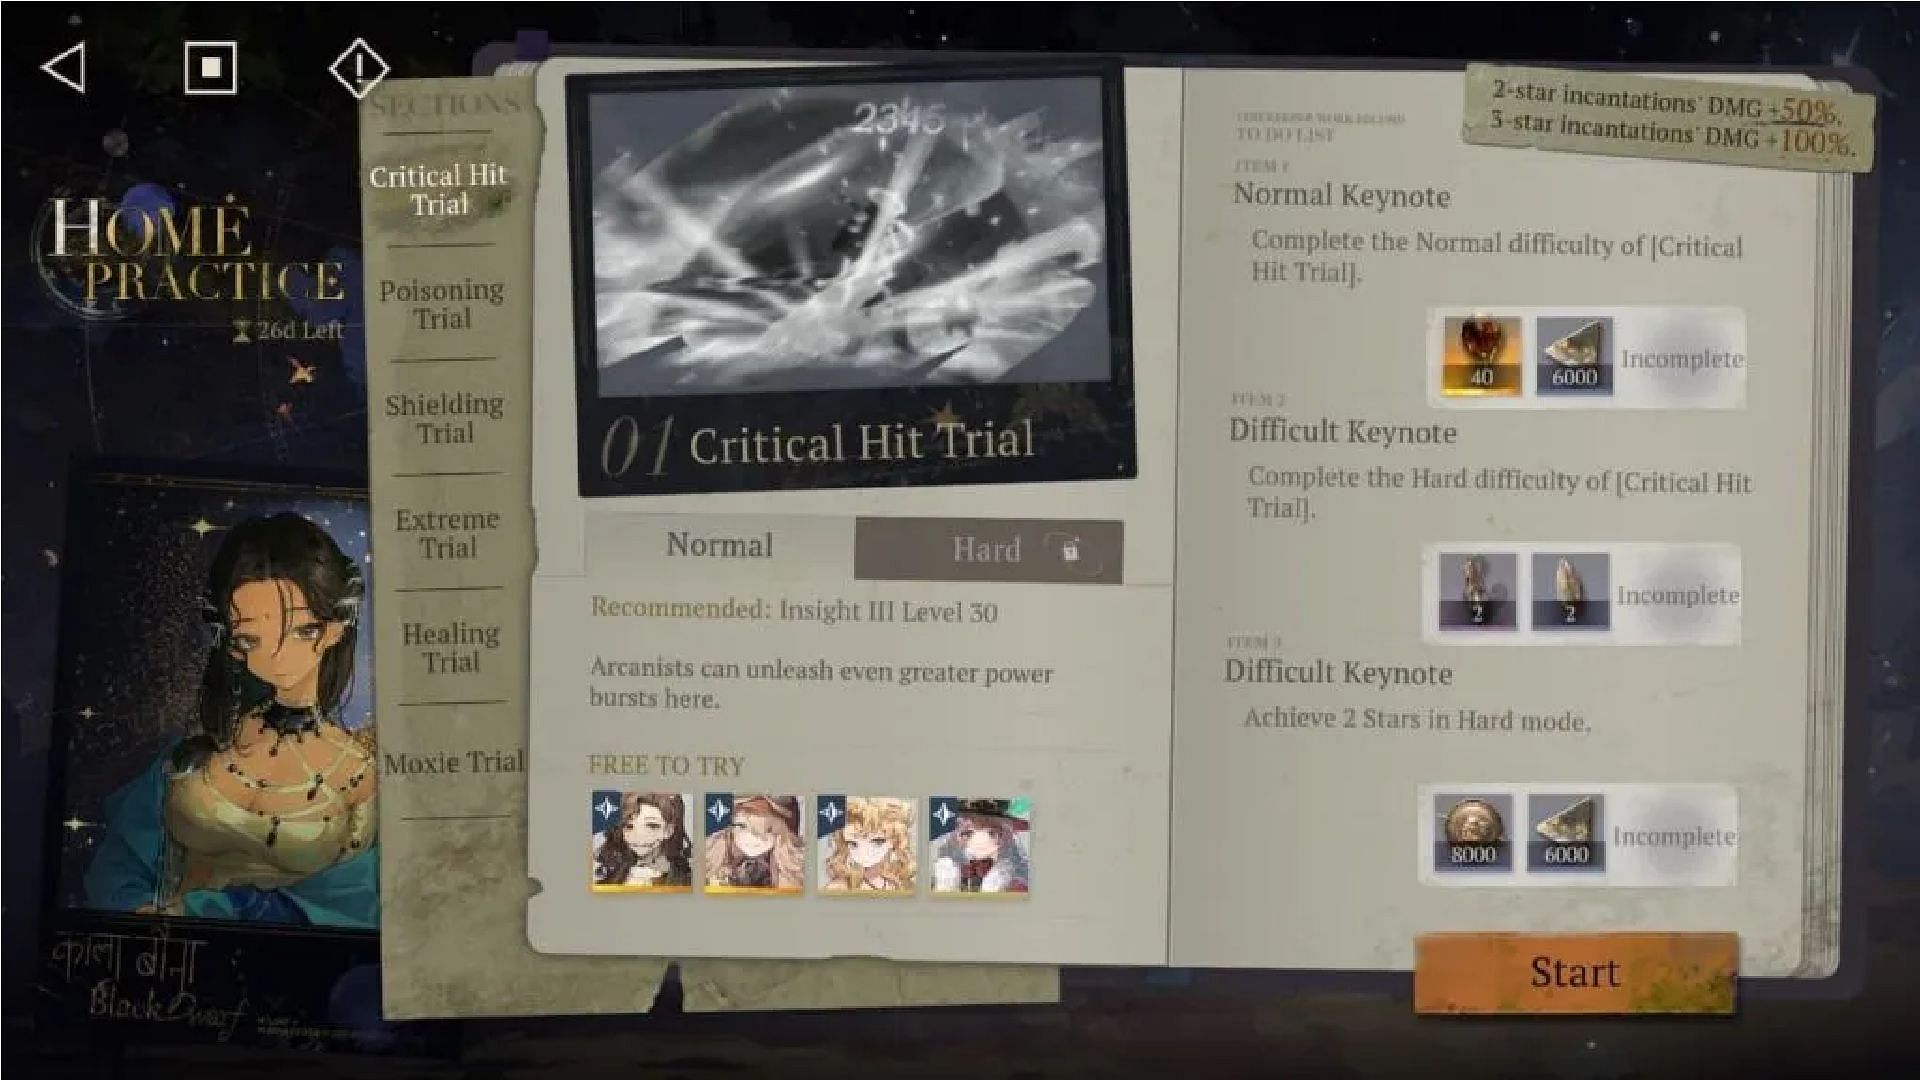 The Critical Hit Trial is the first trial of the Home Practice event (Image via Bluepoch)